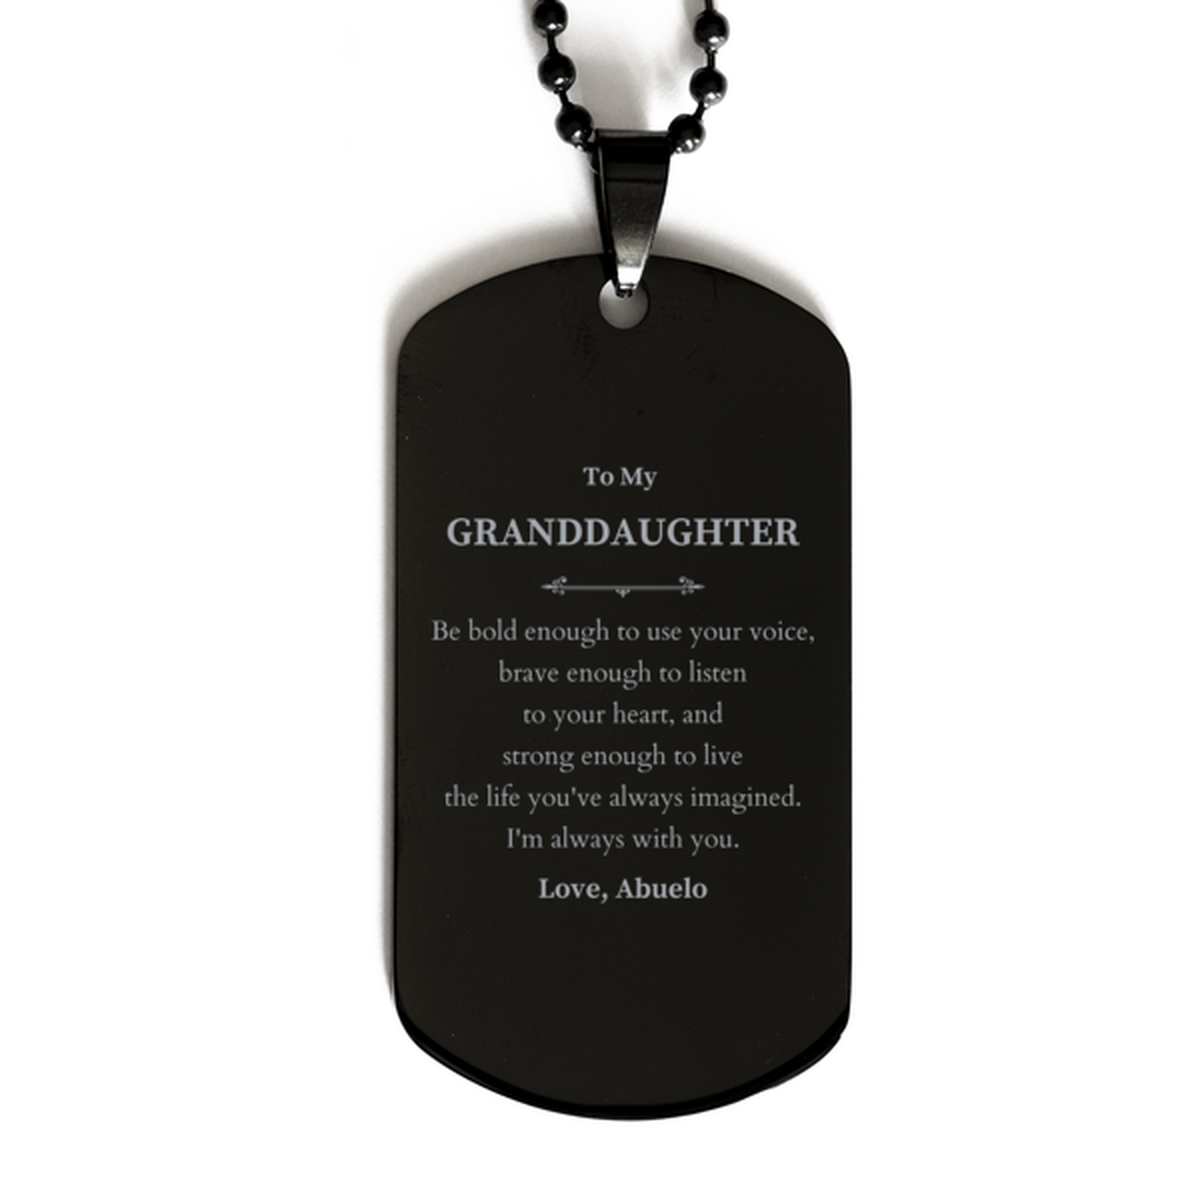 Keepsake Granddaughter Black Dog Tag Gift Idea Graduation Christmas Birthday Granddaughter from Abuelo, Granddaughter Be bold enough to use your voice, brave enough to listen to your heart. Love, Abuelo